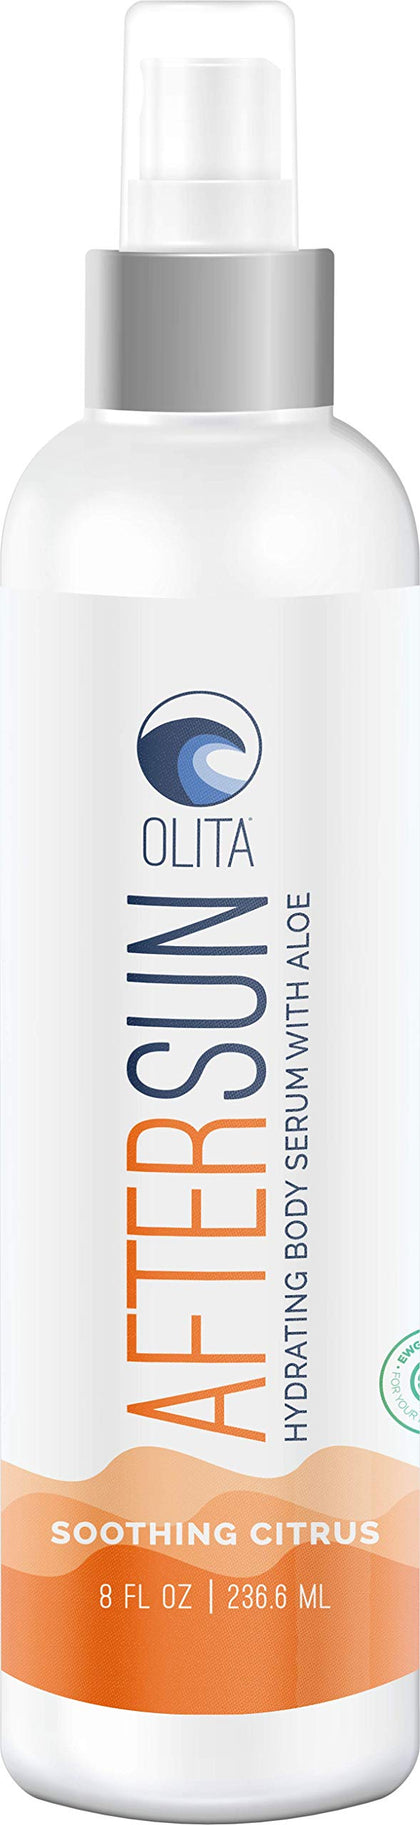 Olita AfterSun Body Serum - Soothing Citrus Fragrance - 8 oz - Hydrating Body Oil with Aloe Vera - All-Natural with Vitamin E - Cooling Sunburn Relief